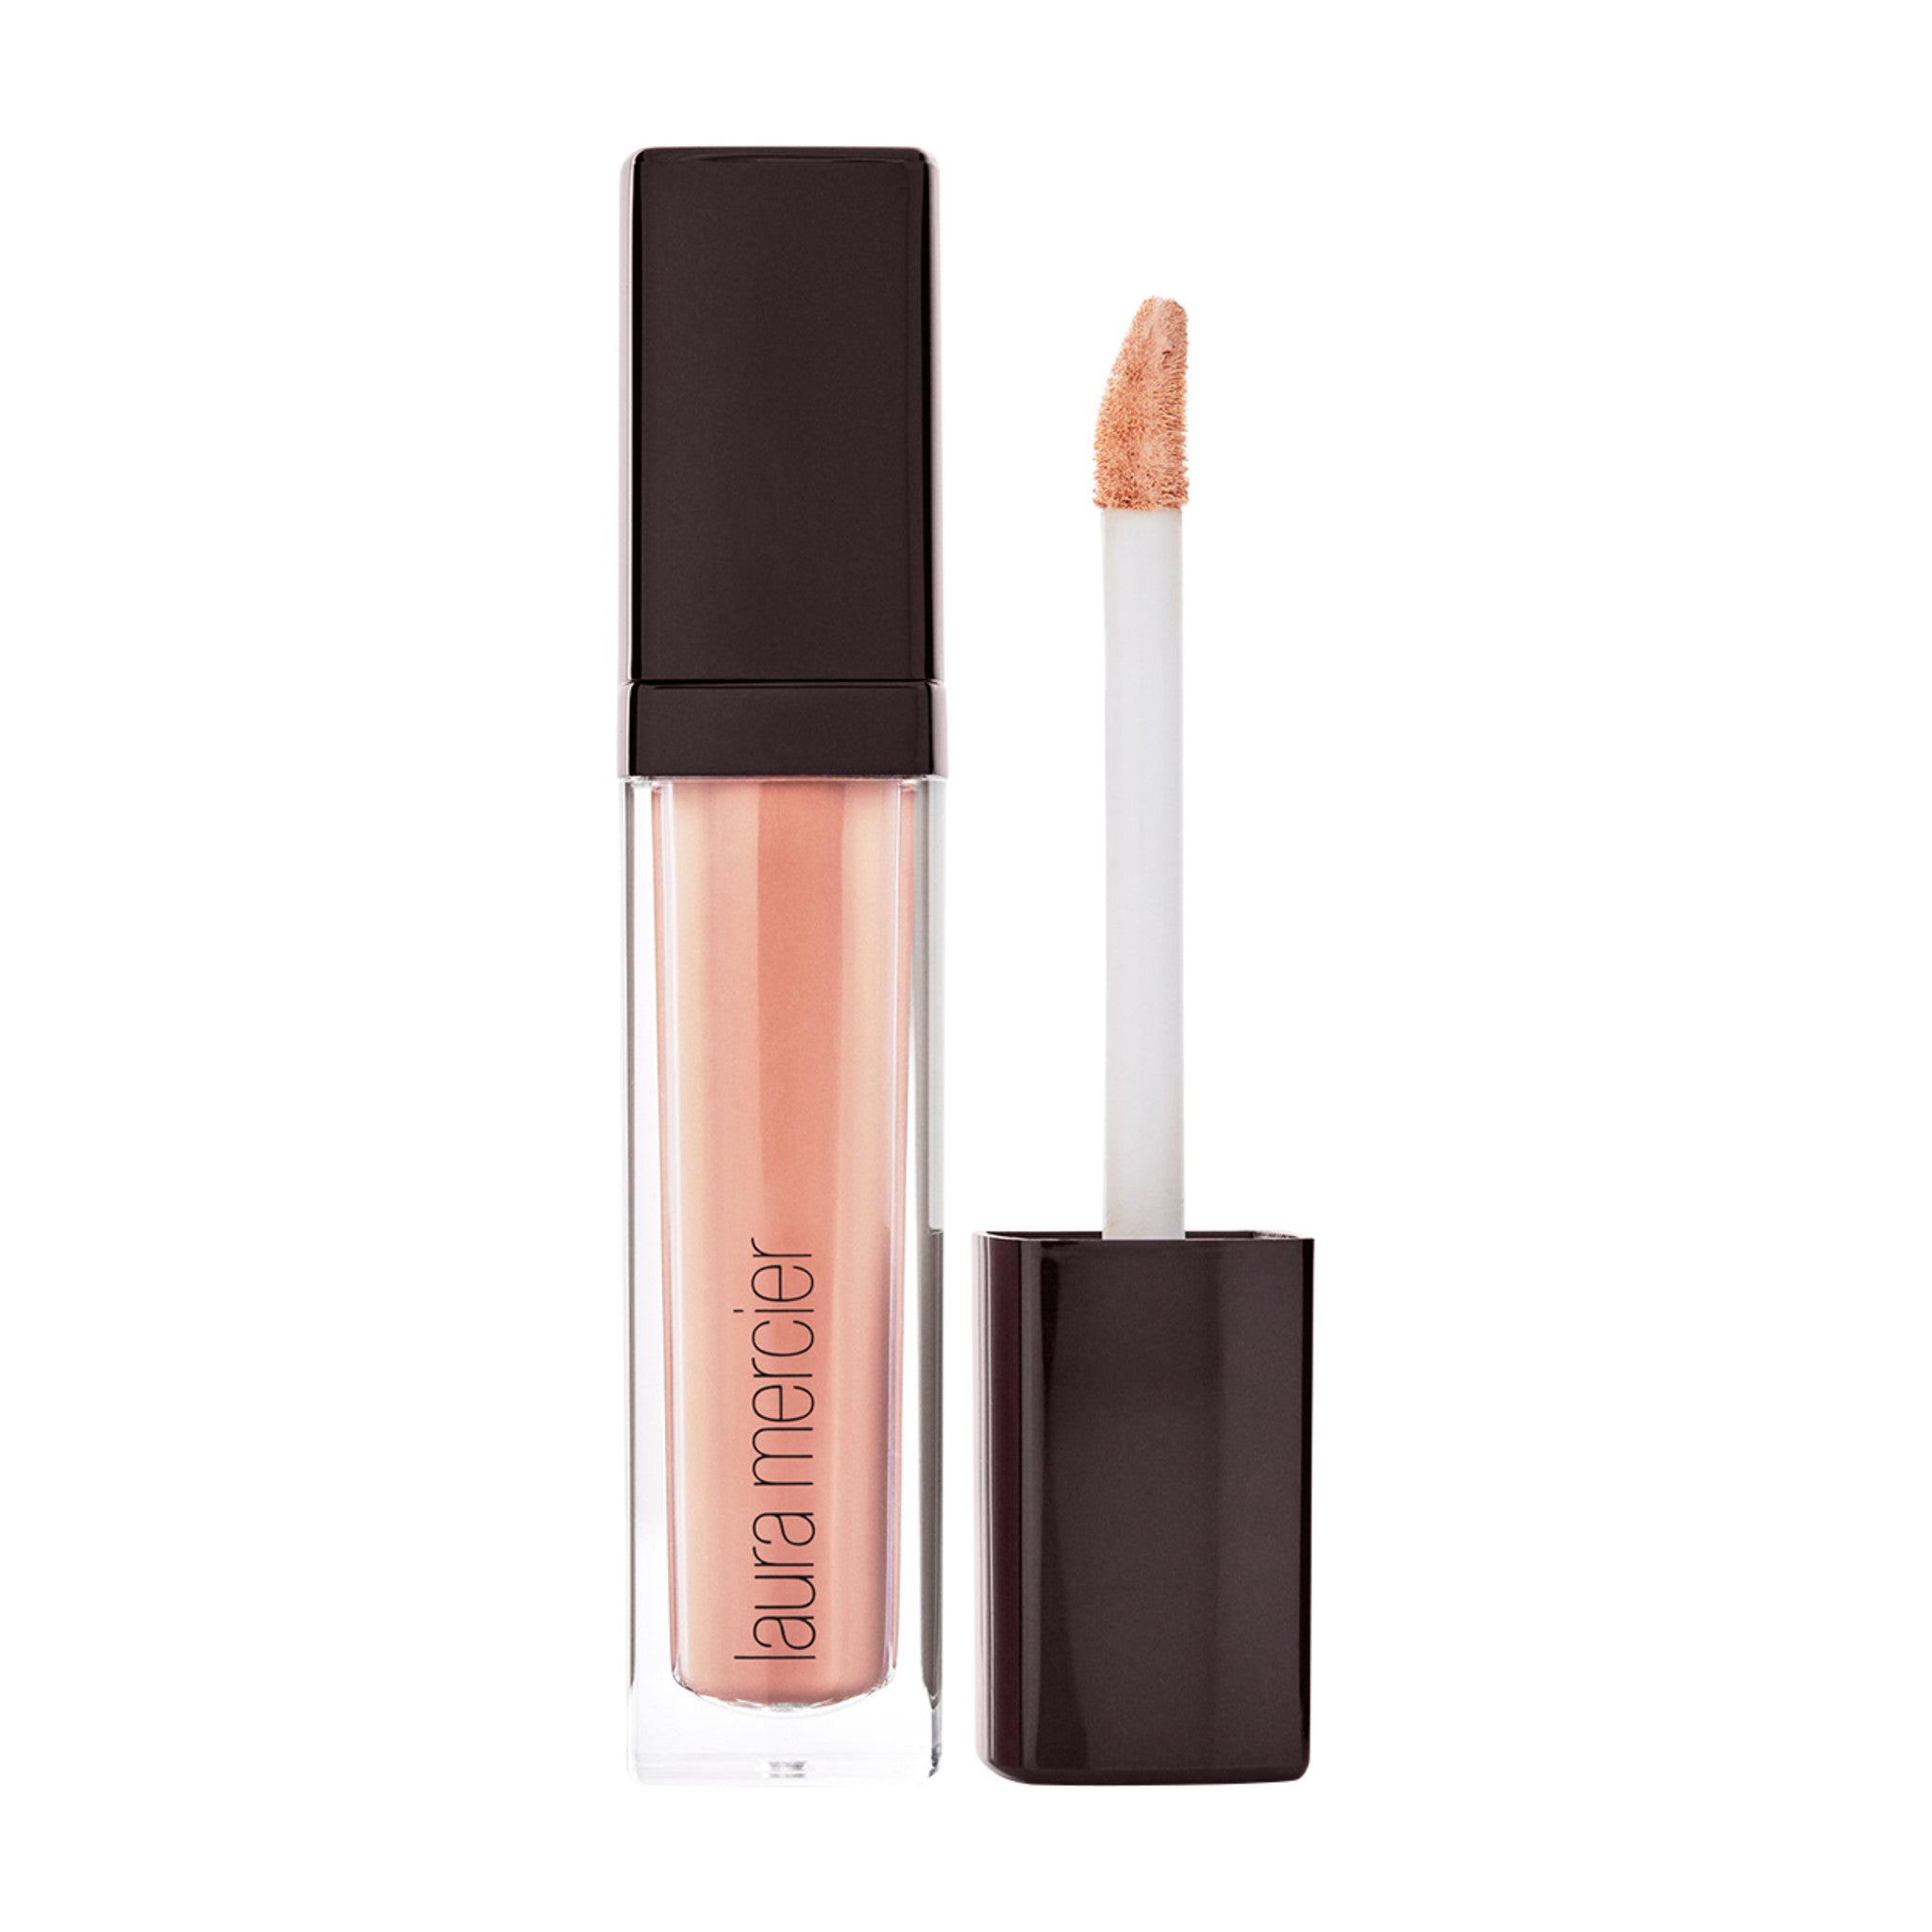 Laura Mercier Eye Basics Color/Shade variant: Linen main image. This product is in the color nude